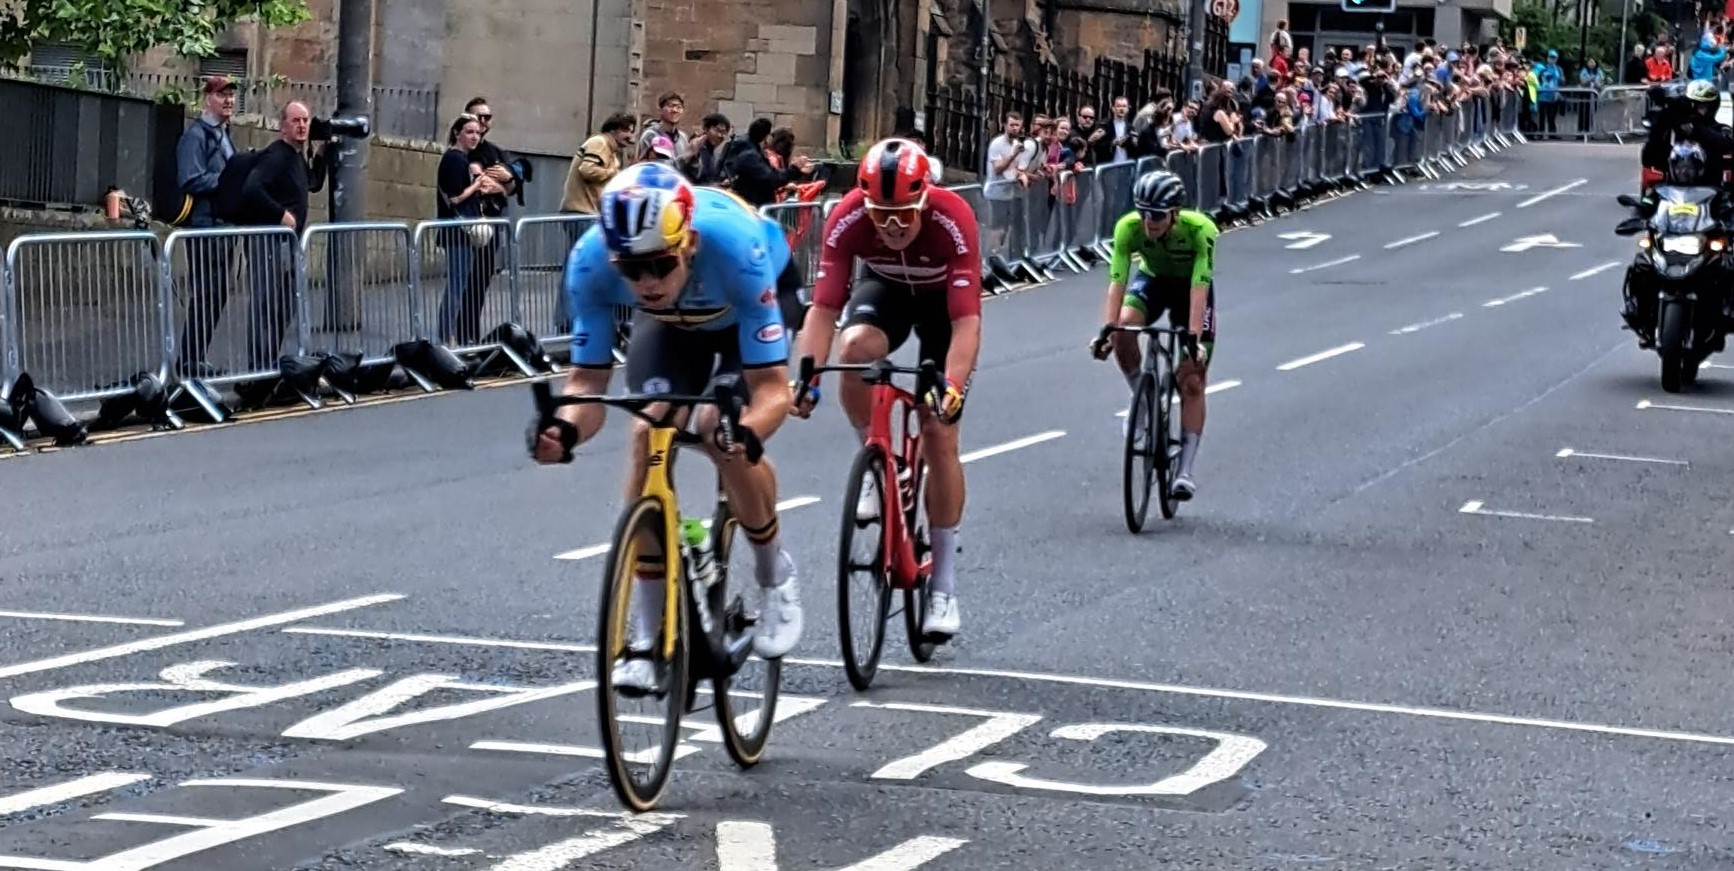 Glasgow UCI world cycling champs road race tour